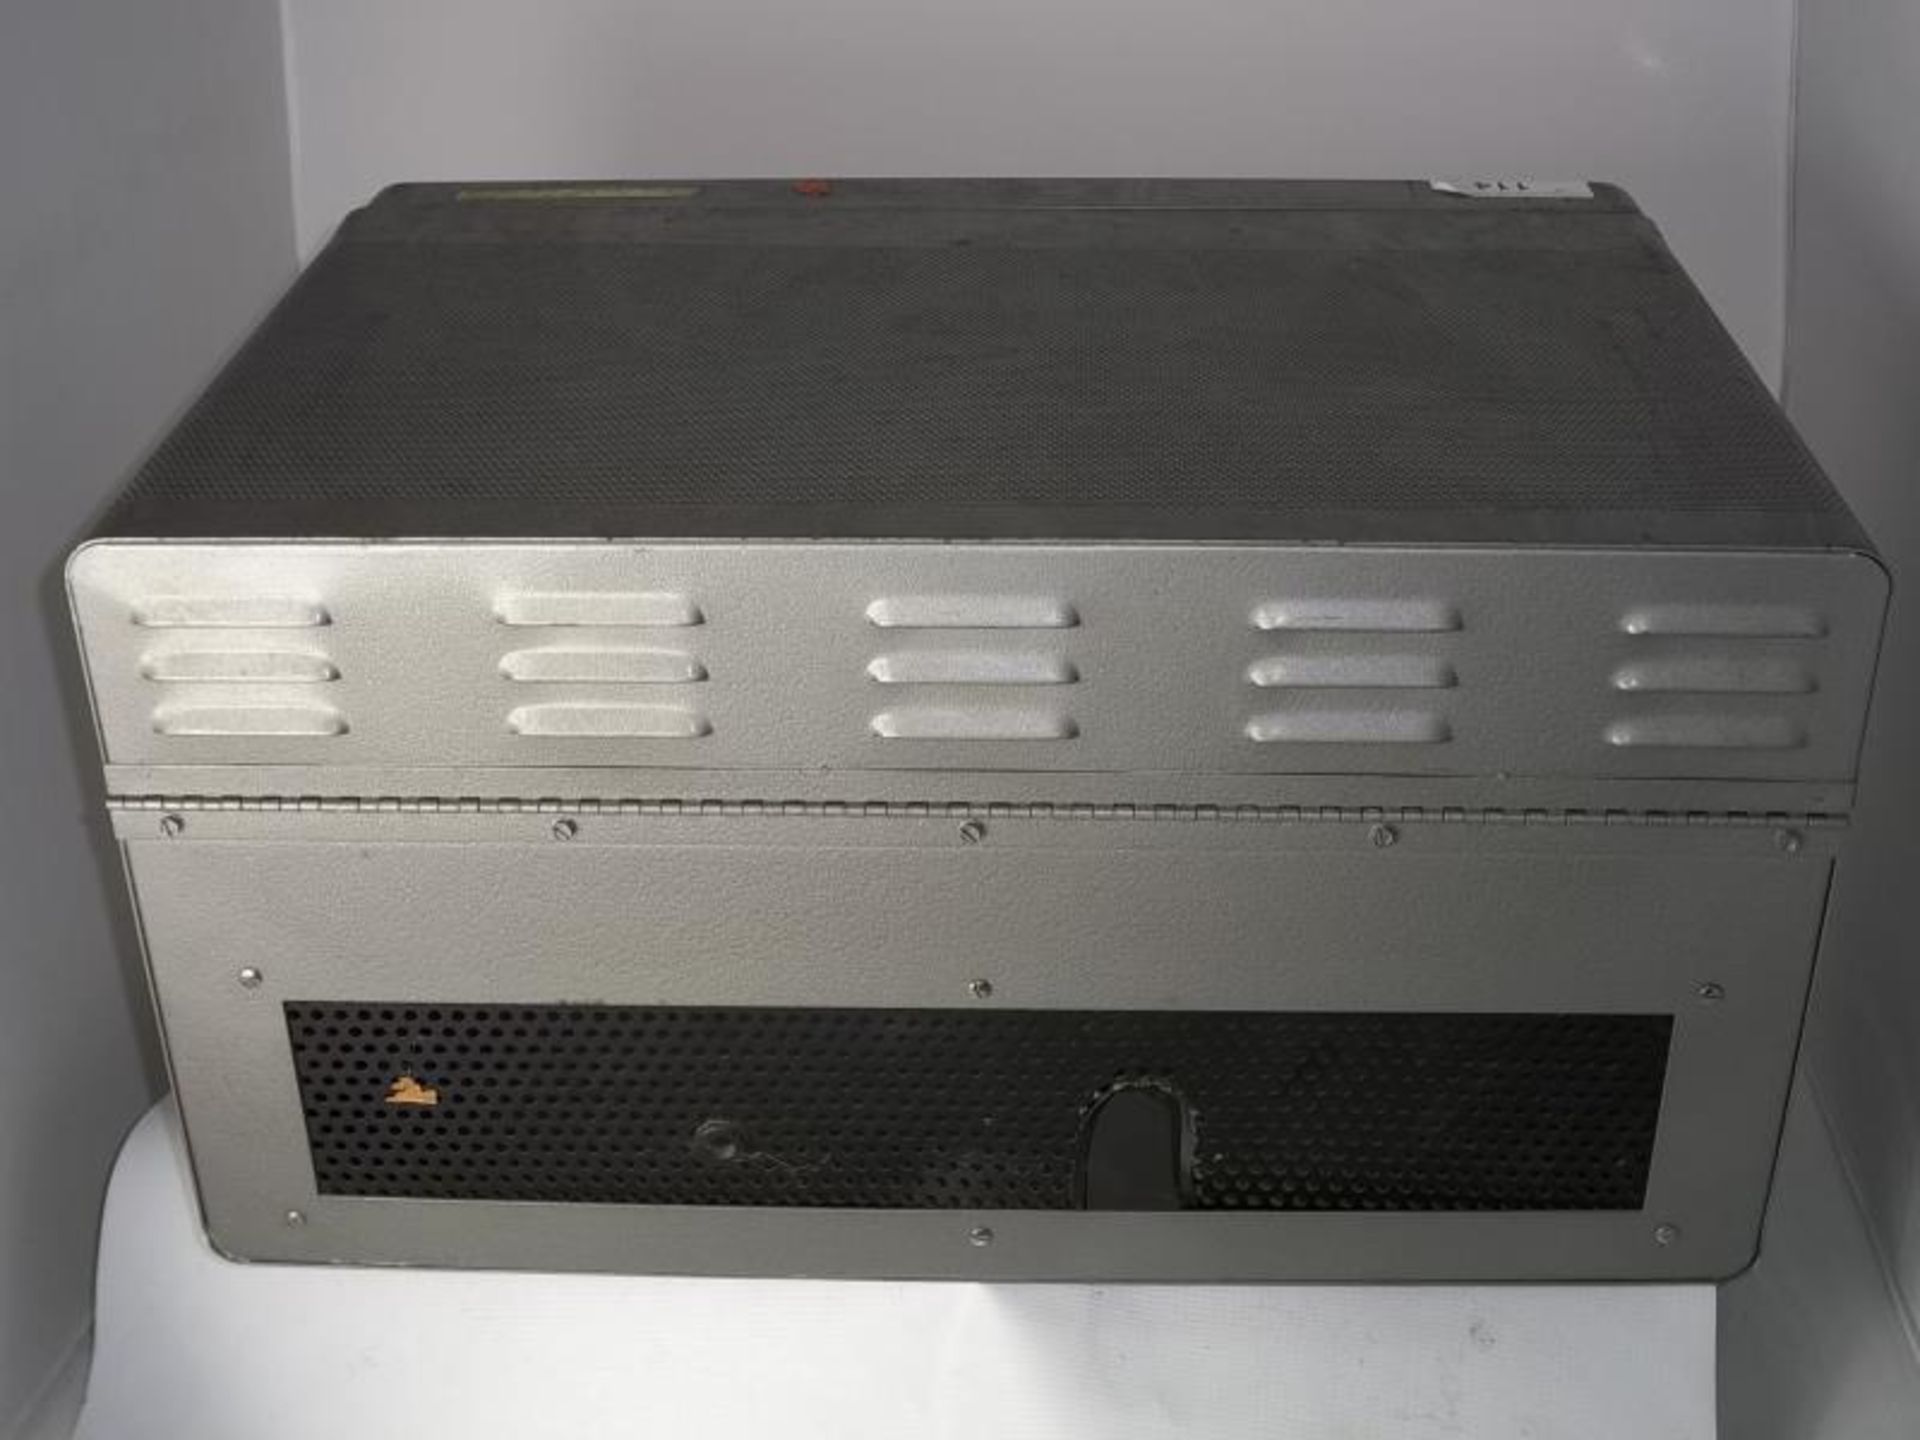 gray metal stainless steel stacking receiver case holder, lift top side handles, Bud Radio Corp., - Image 3 of 4